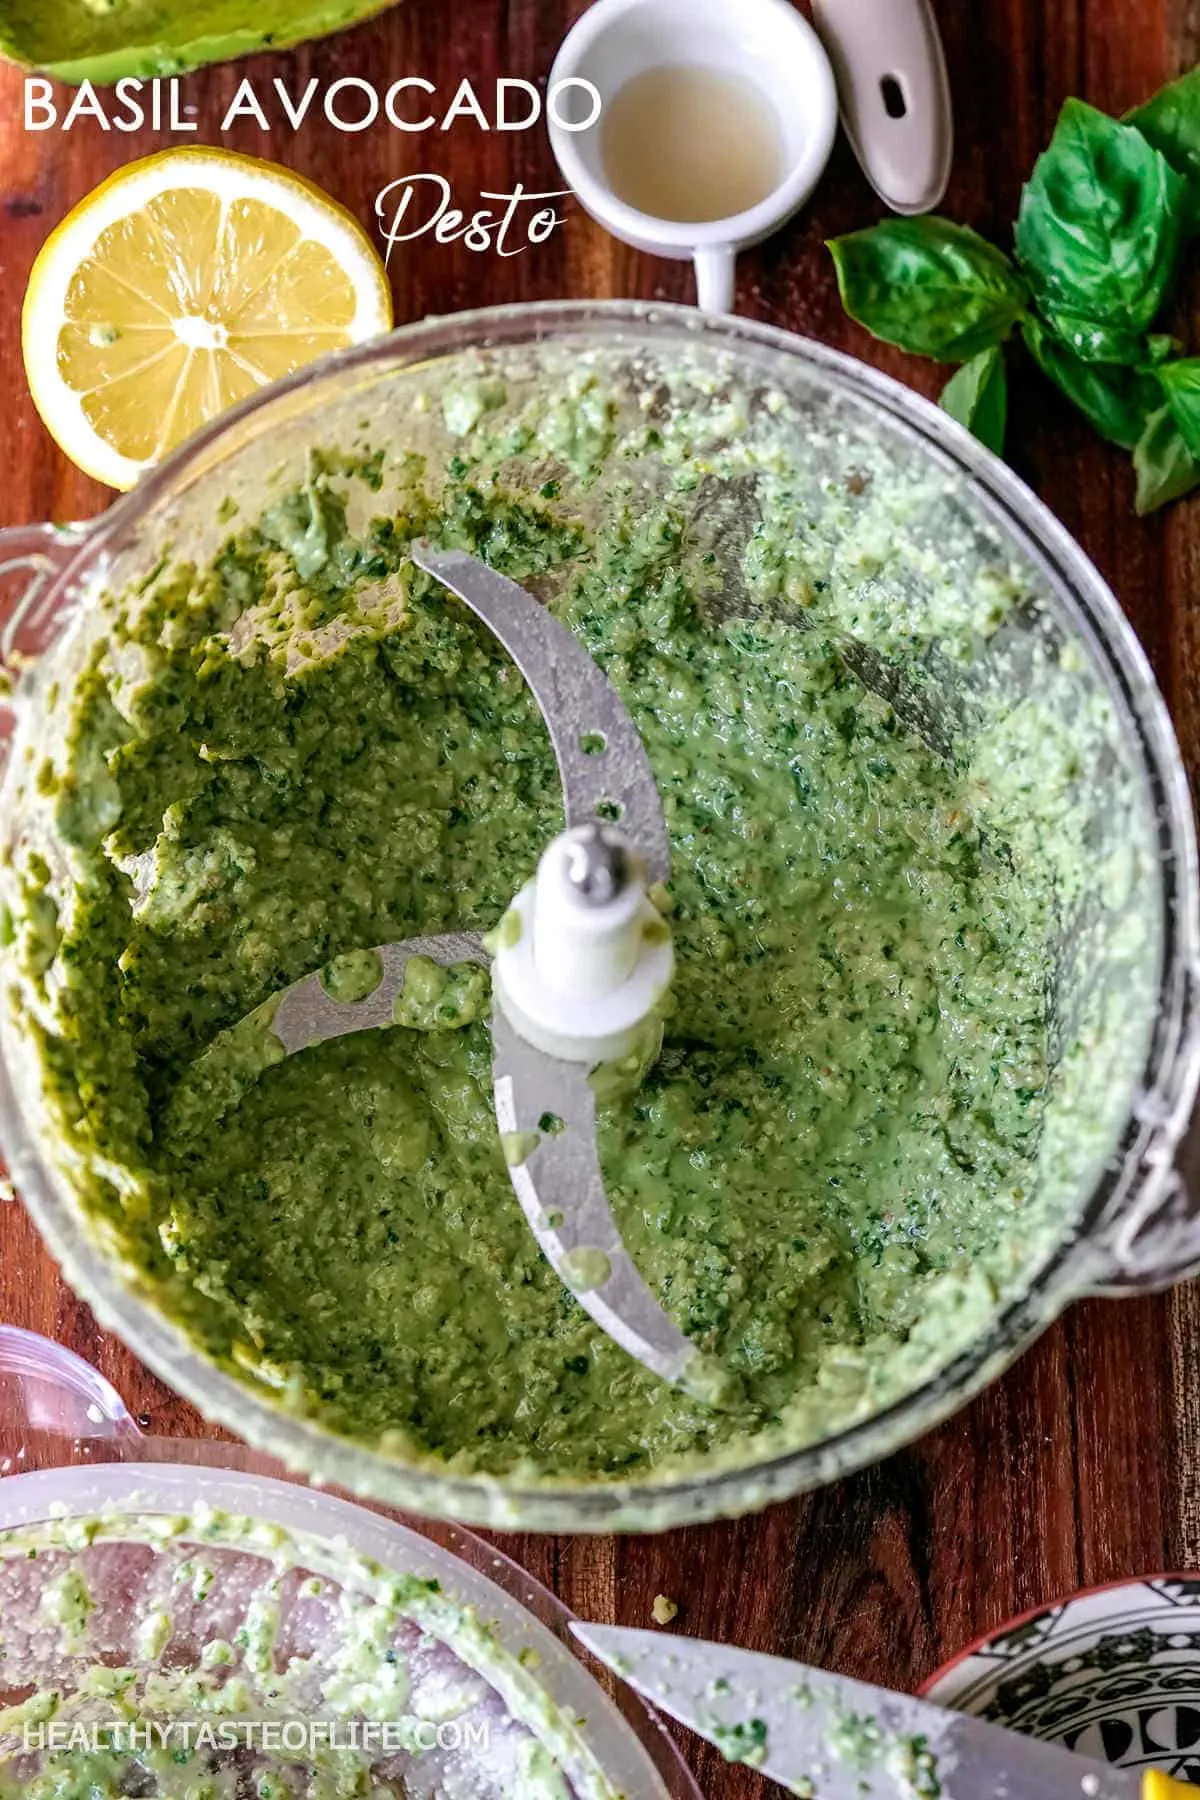 Pesto for soba noodles made with avocado, walnuts, parsley, lemon, garlic, maple syrup and sea salt blended in a food processor.